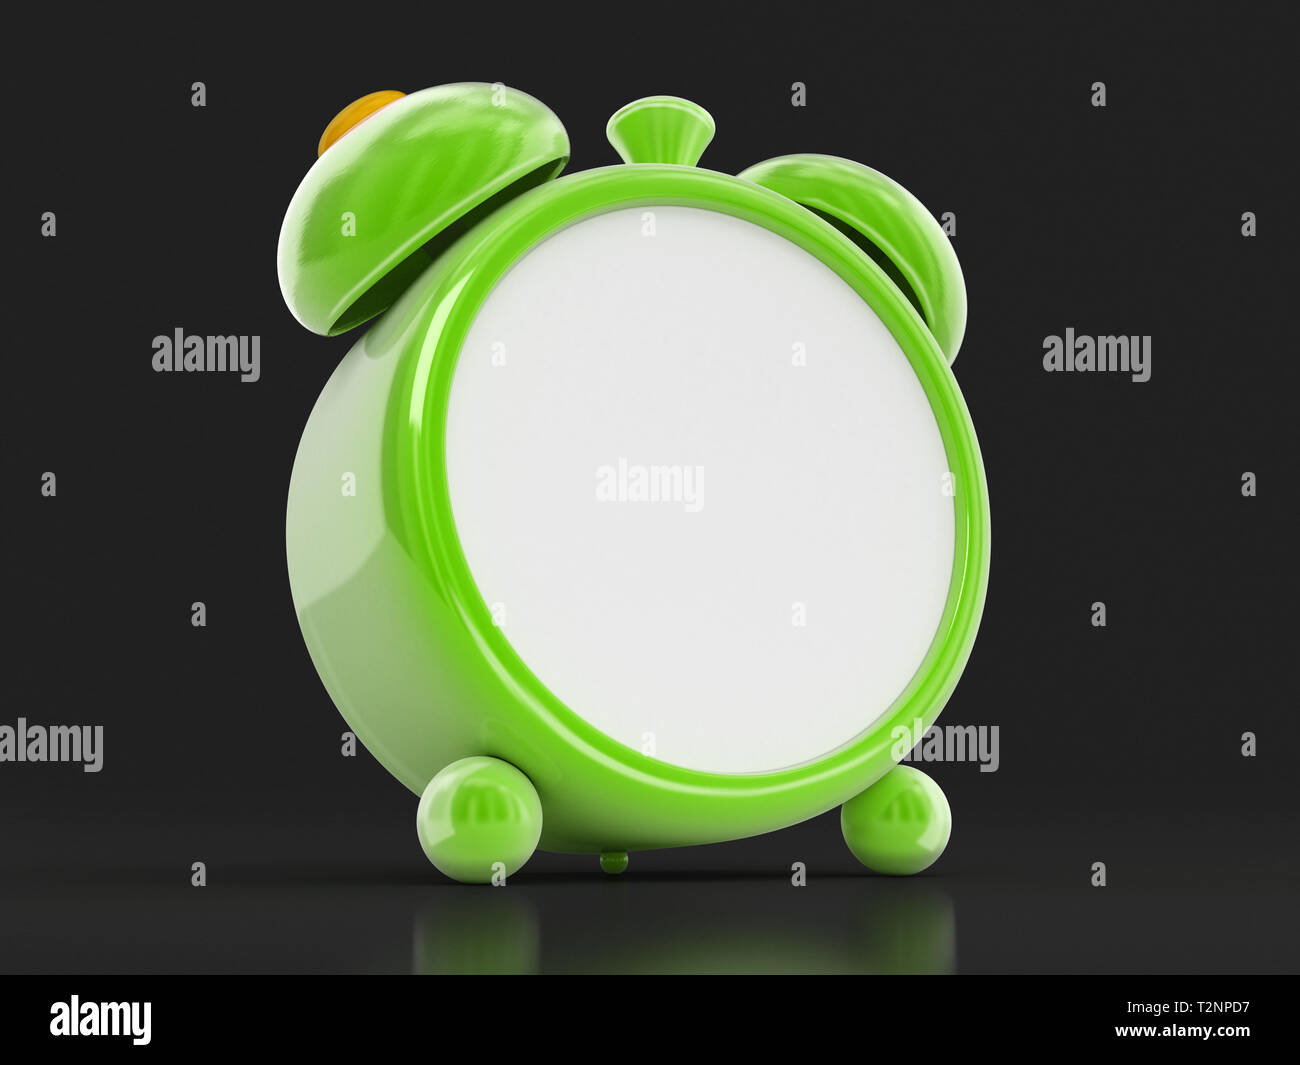 Alarm Clock. Image with clipping path Stock Photo